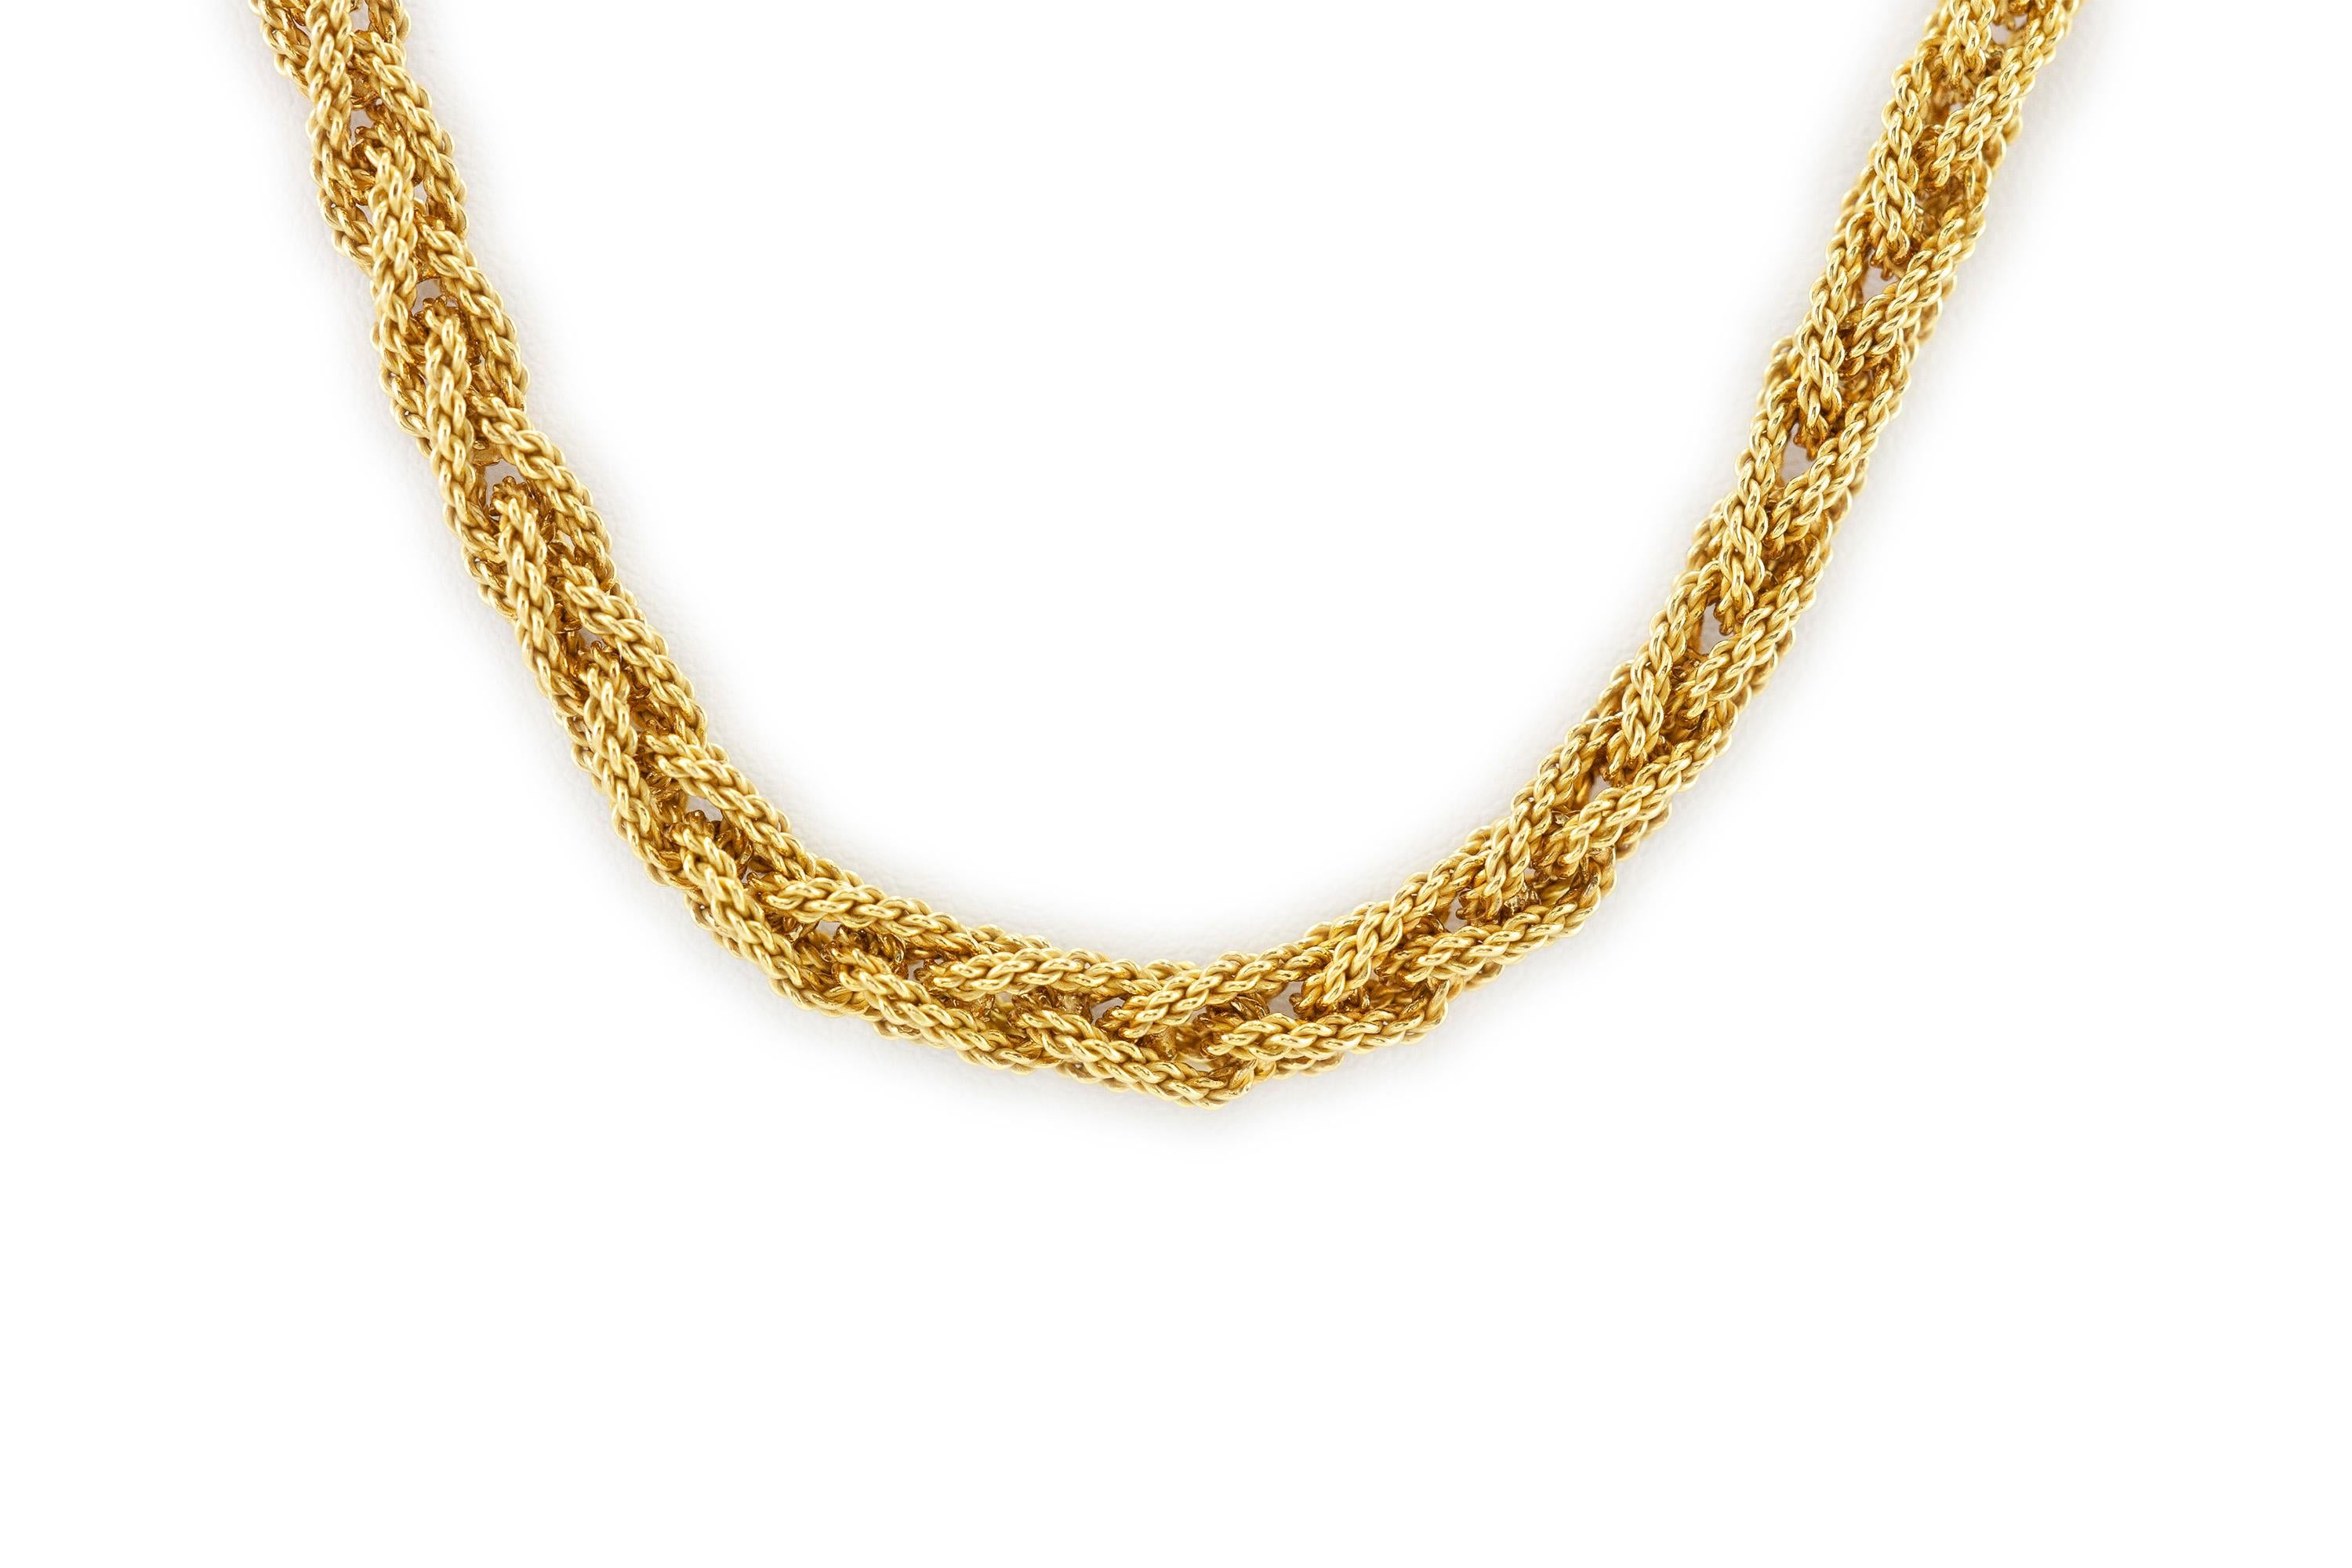 The beautiful necklace is finely crafted in 18K gold.
It is wighs approximately a total of 121.3 grams and is 36 inches long.
Circa 1960.